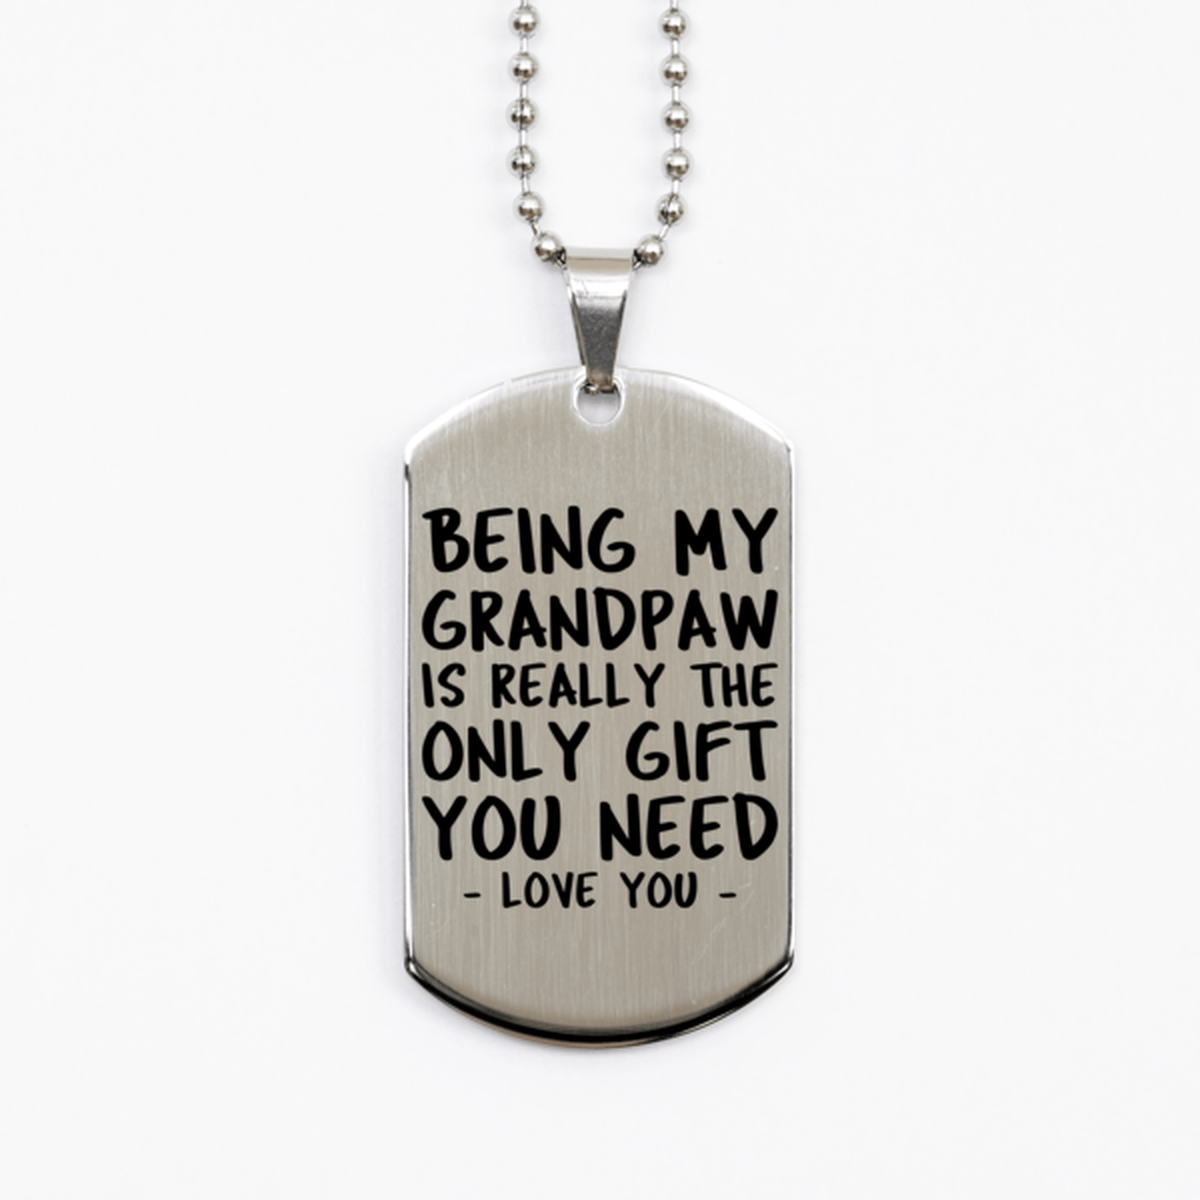 Funny Grandpaw Silver Dog Tag Necklace, Being My Grandpaw Is Really the Only Gift You Need, Best Birthday Gifts for Grandpaw